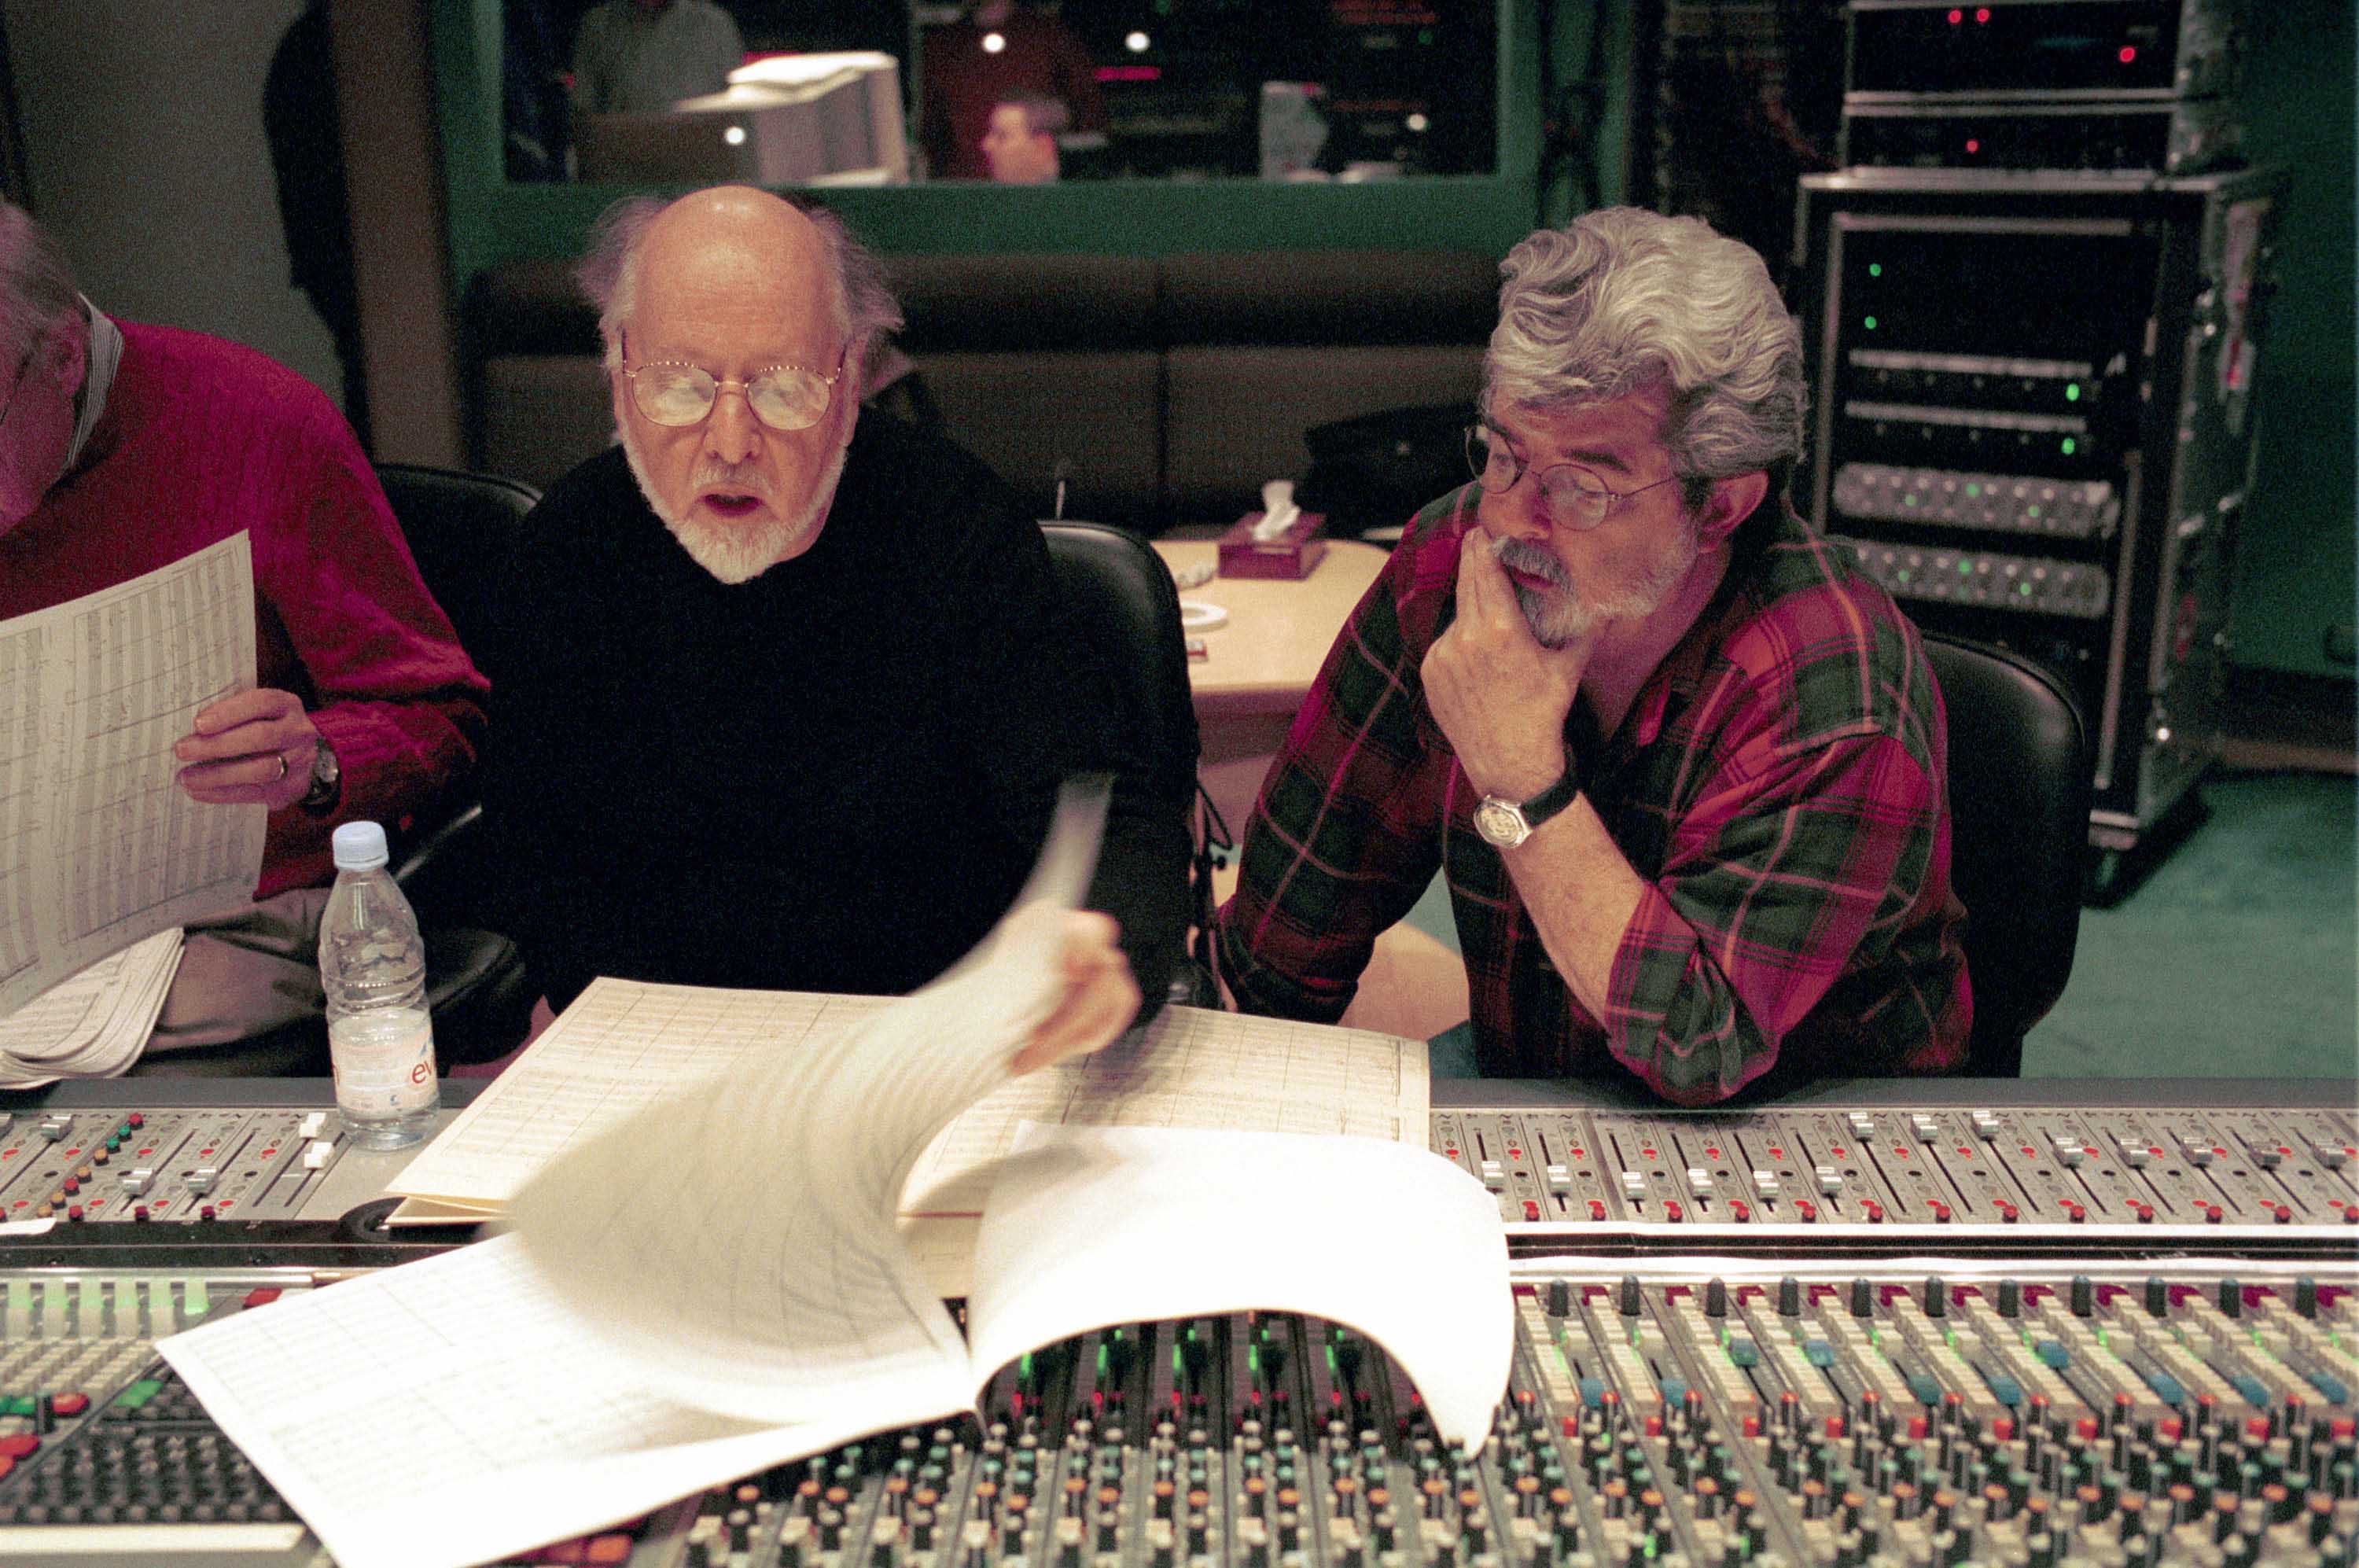 New Documentary Puts The Beatles and Abbey Road Studios in Focus